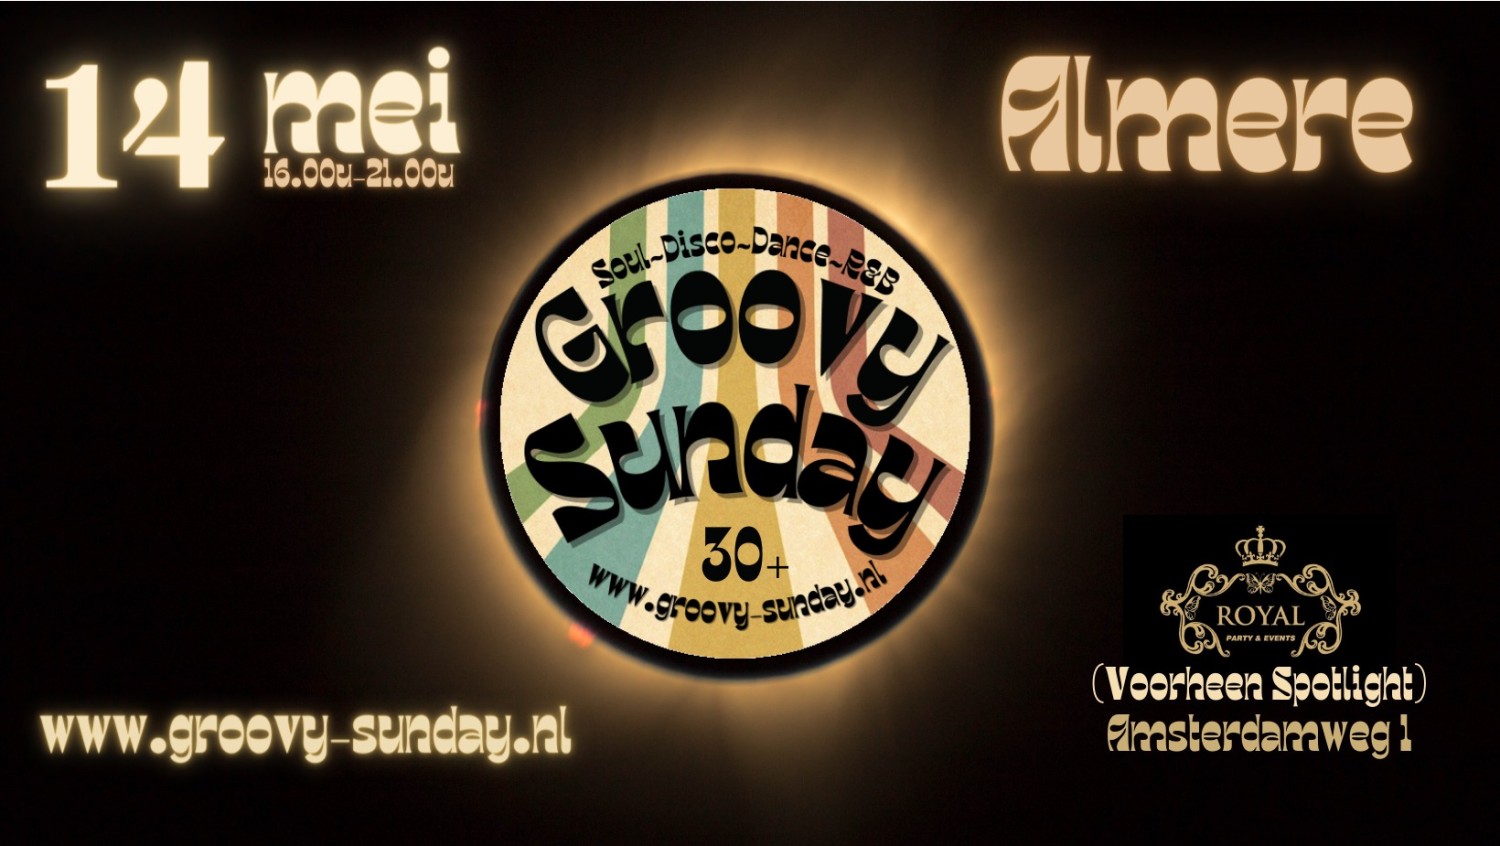 Groovy-Sunday Almere